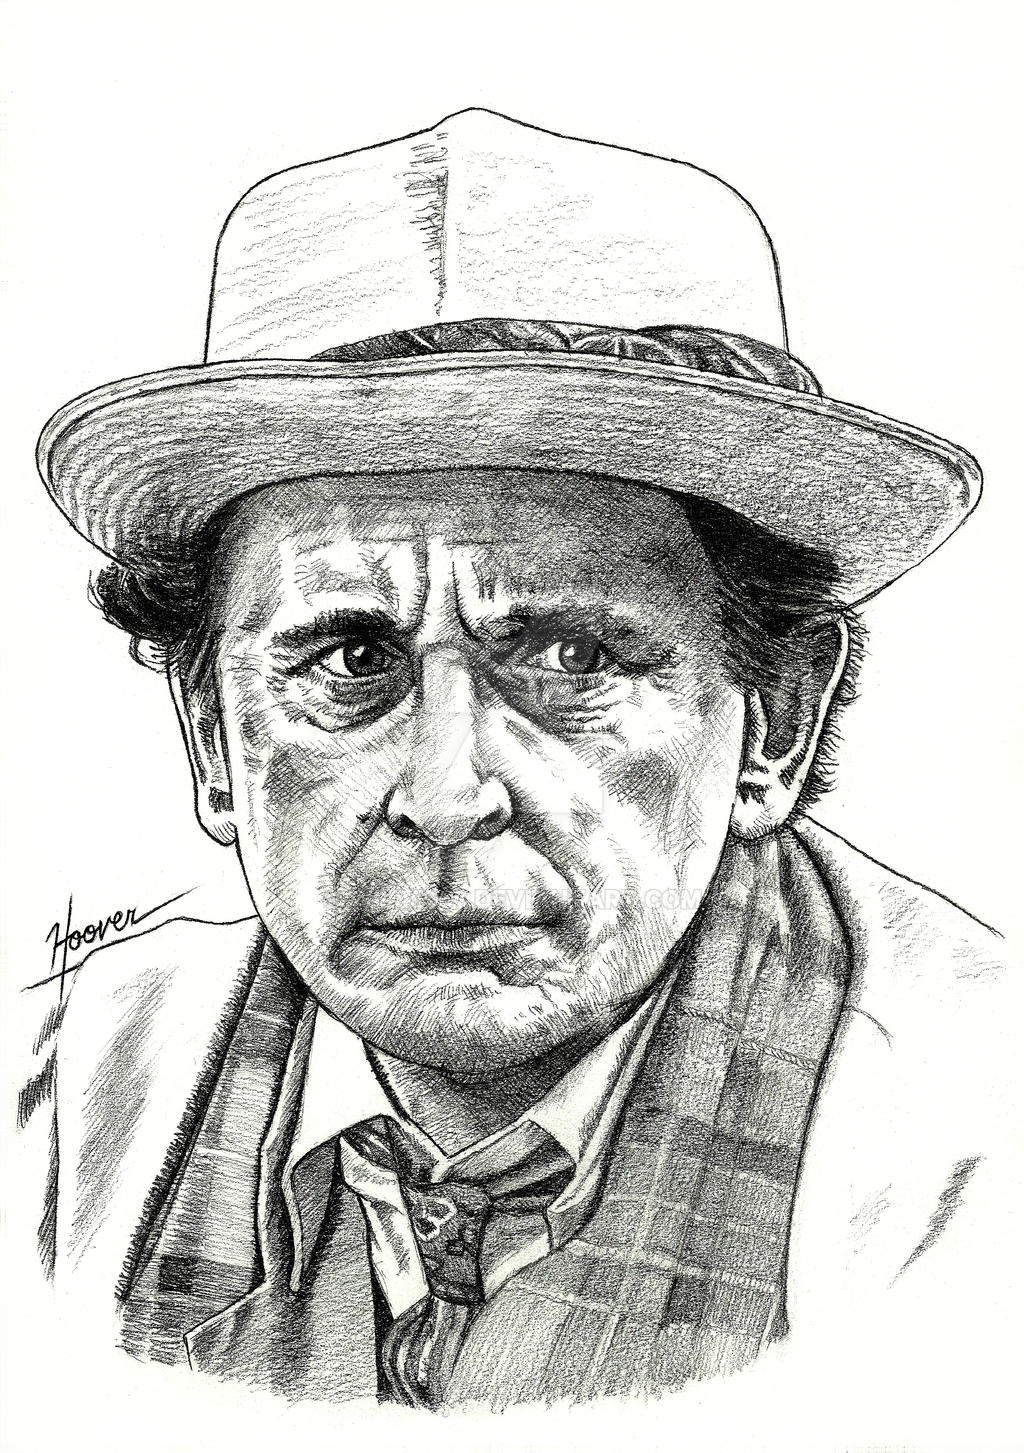 7 - Sylvester McCoy - 04012013 by will5967 on DeviantArt